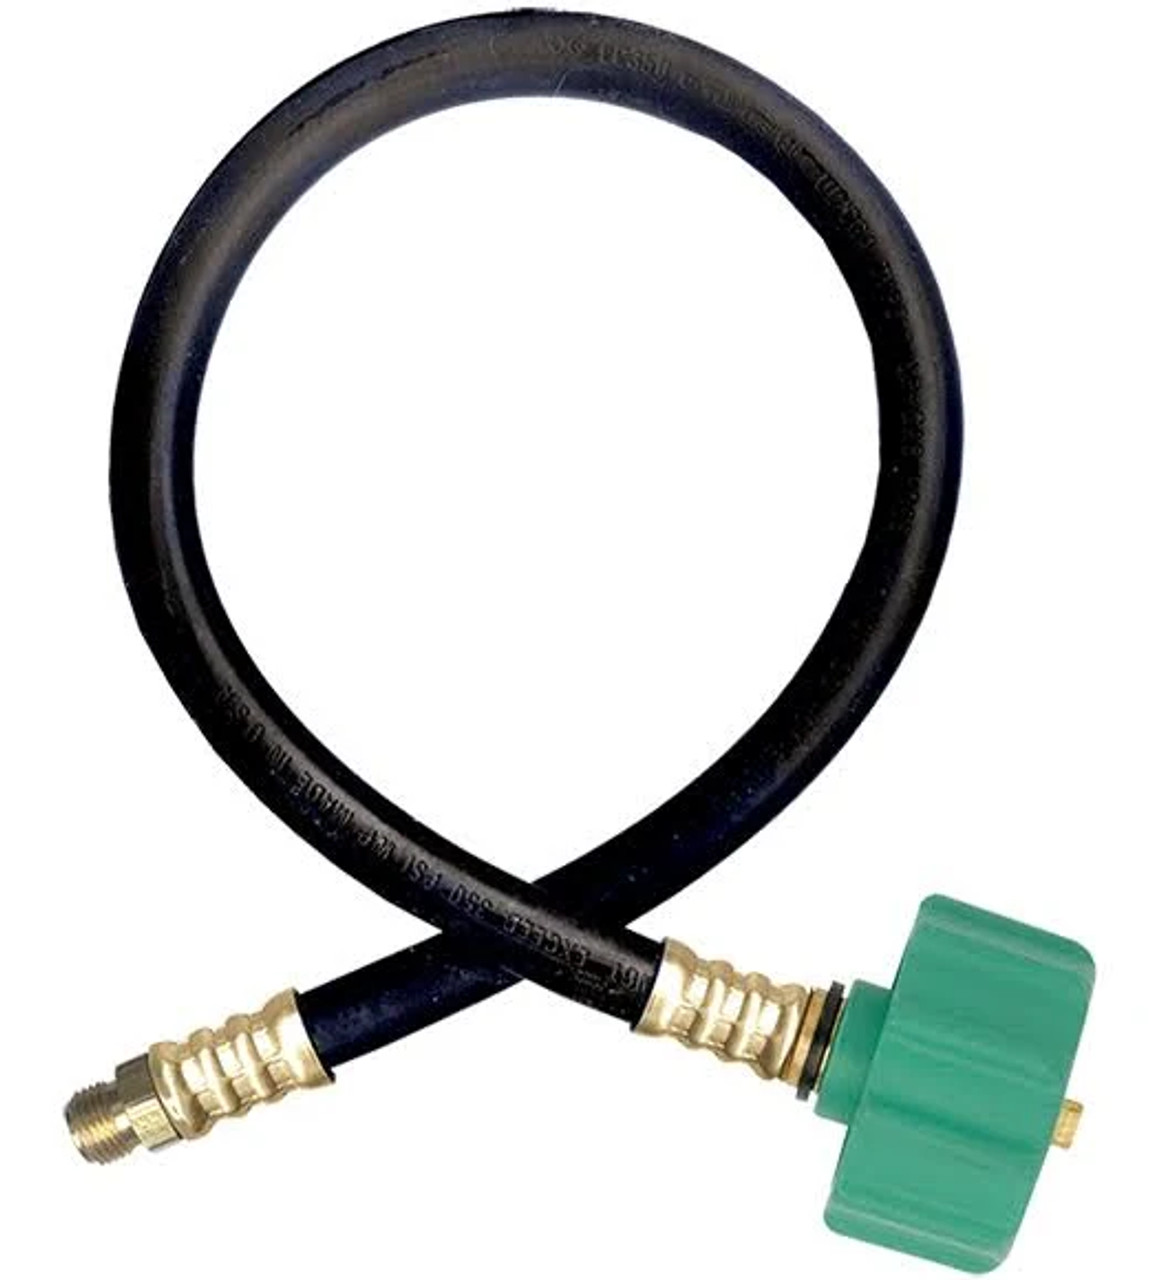 20 " Flexible Rubber Pigtail Replacement for LP Dual Auto/Changeover Regulators with EZ On/Off QCC nut for hand tightening 